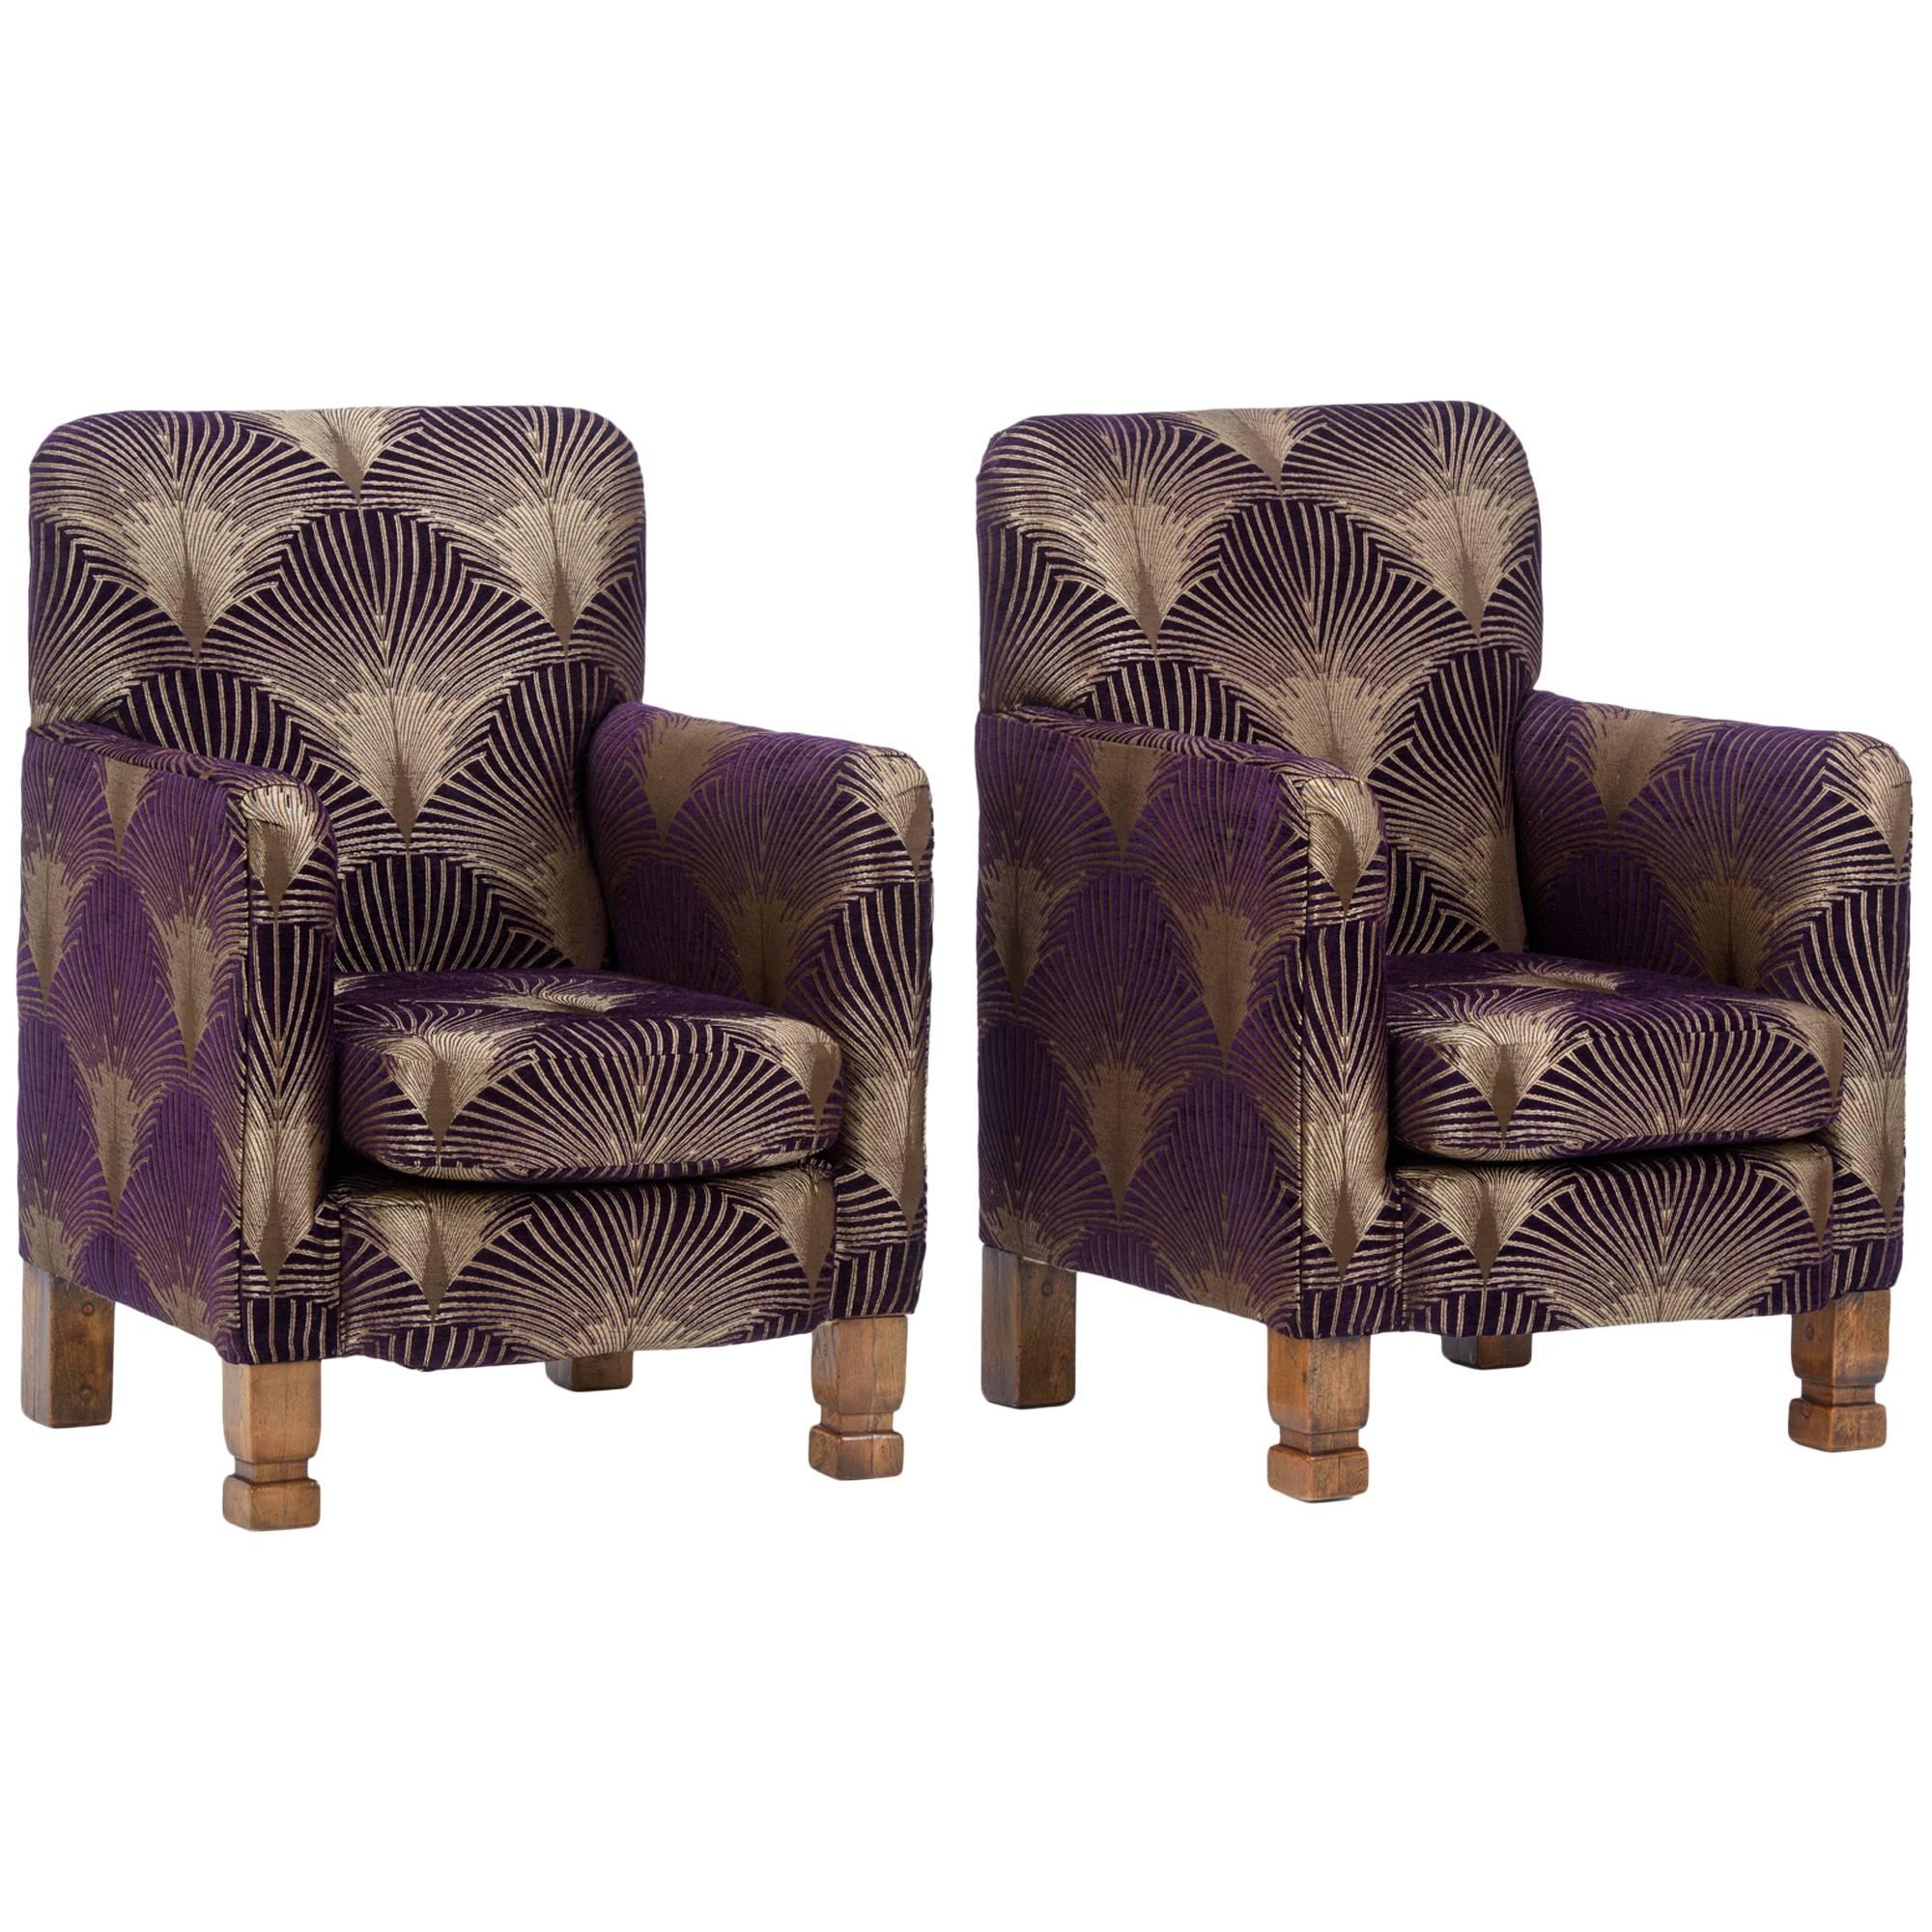 English The Duo of Art Deco Style Aubergine 'Metropolis' Armchairs. For Sale